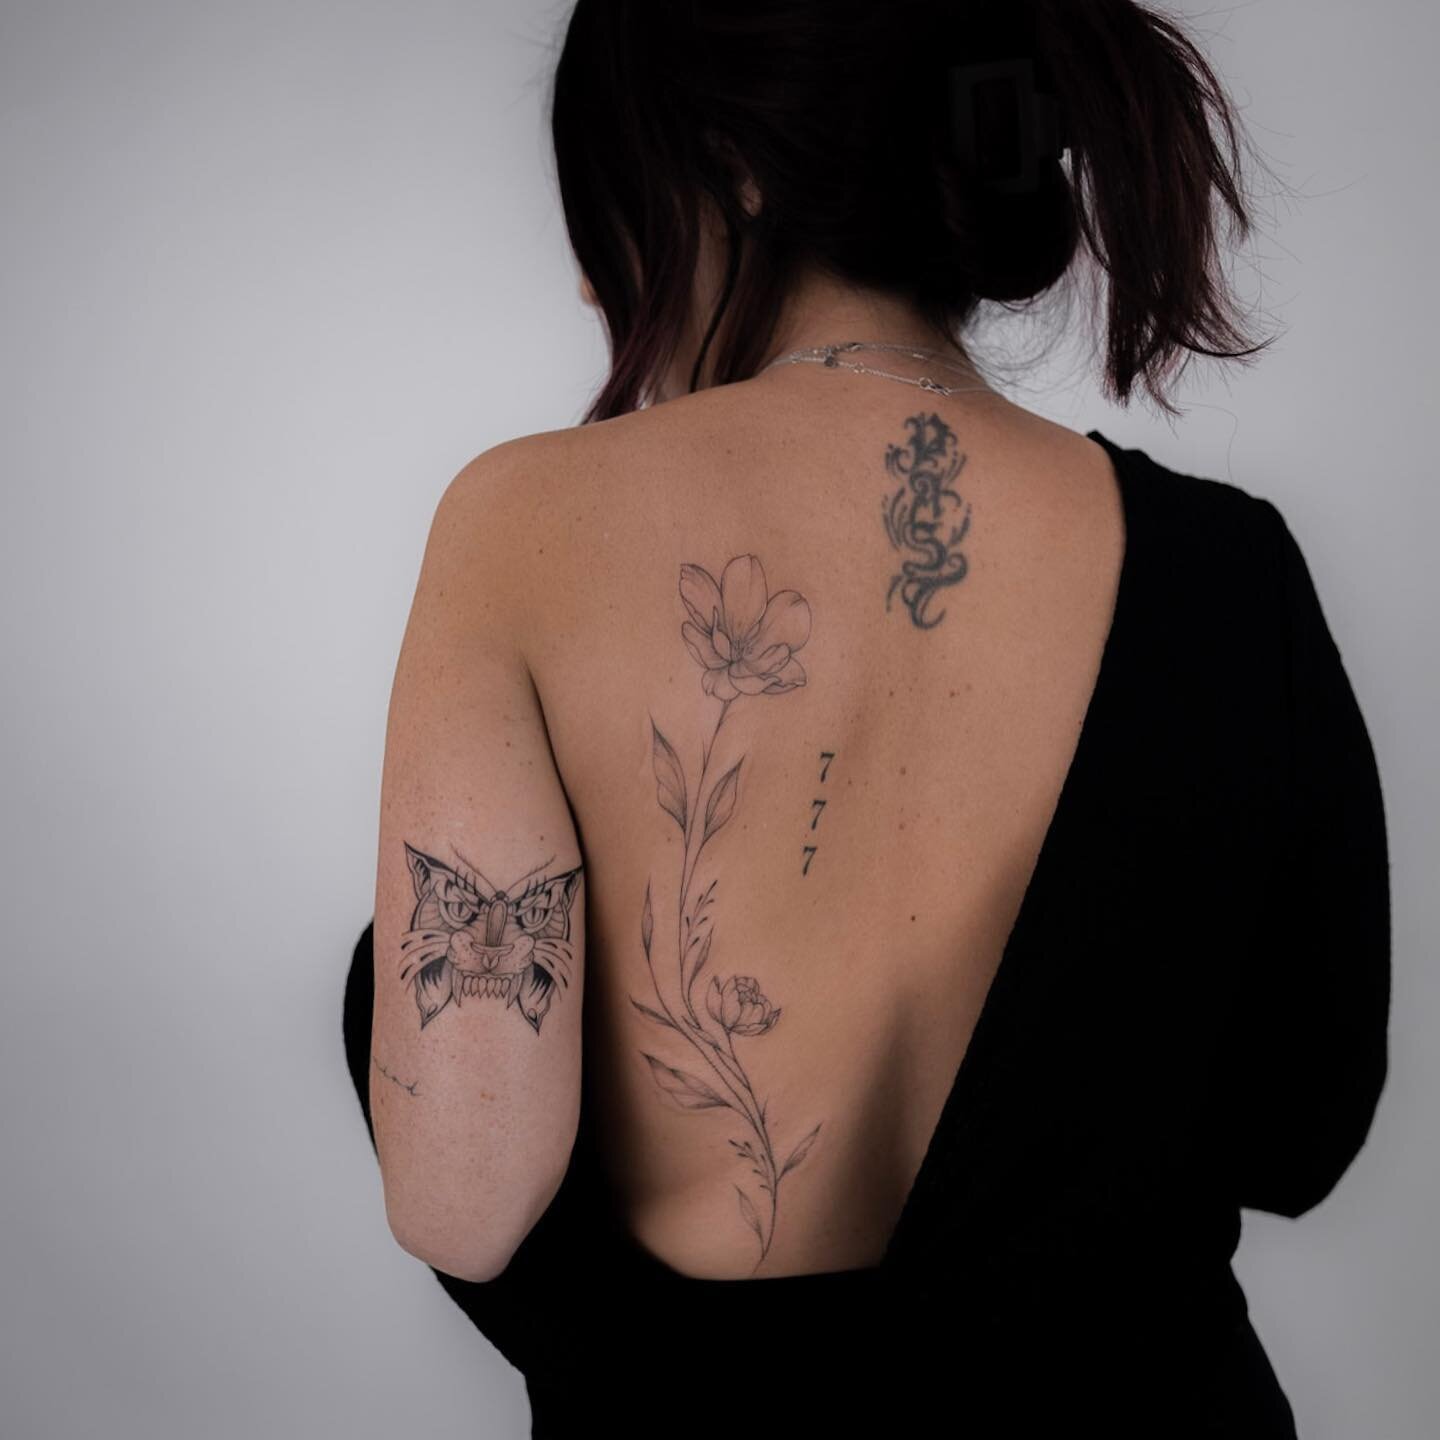 Floral back piece &amp; tiger butterfly for jes. both customs with full creative freedom - these were so fun to design and tattoo. So grateful for your trust jes 🤍